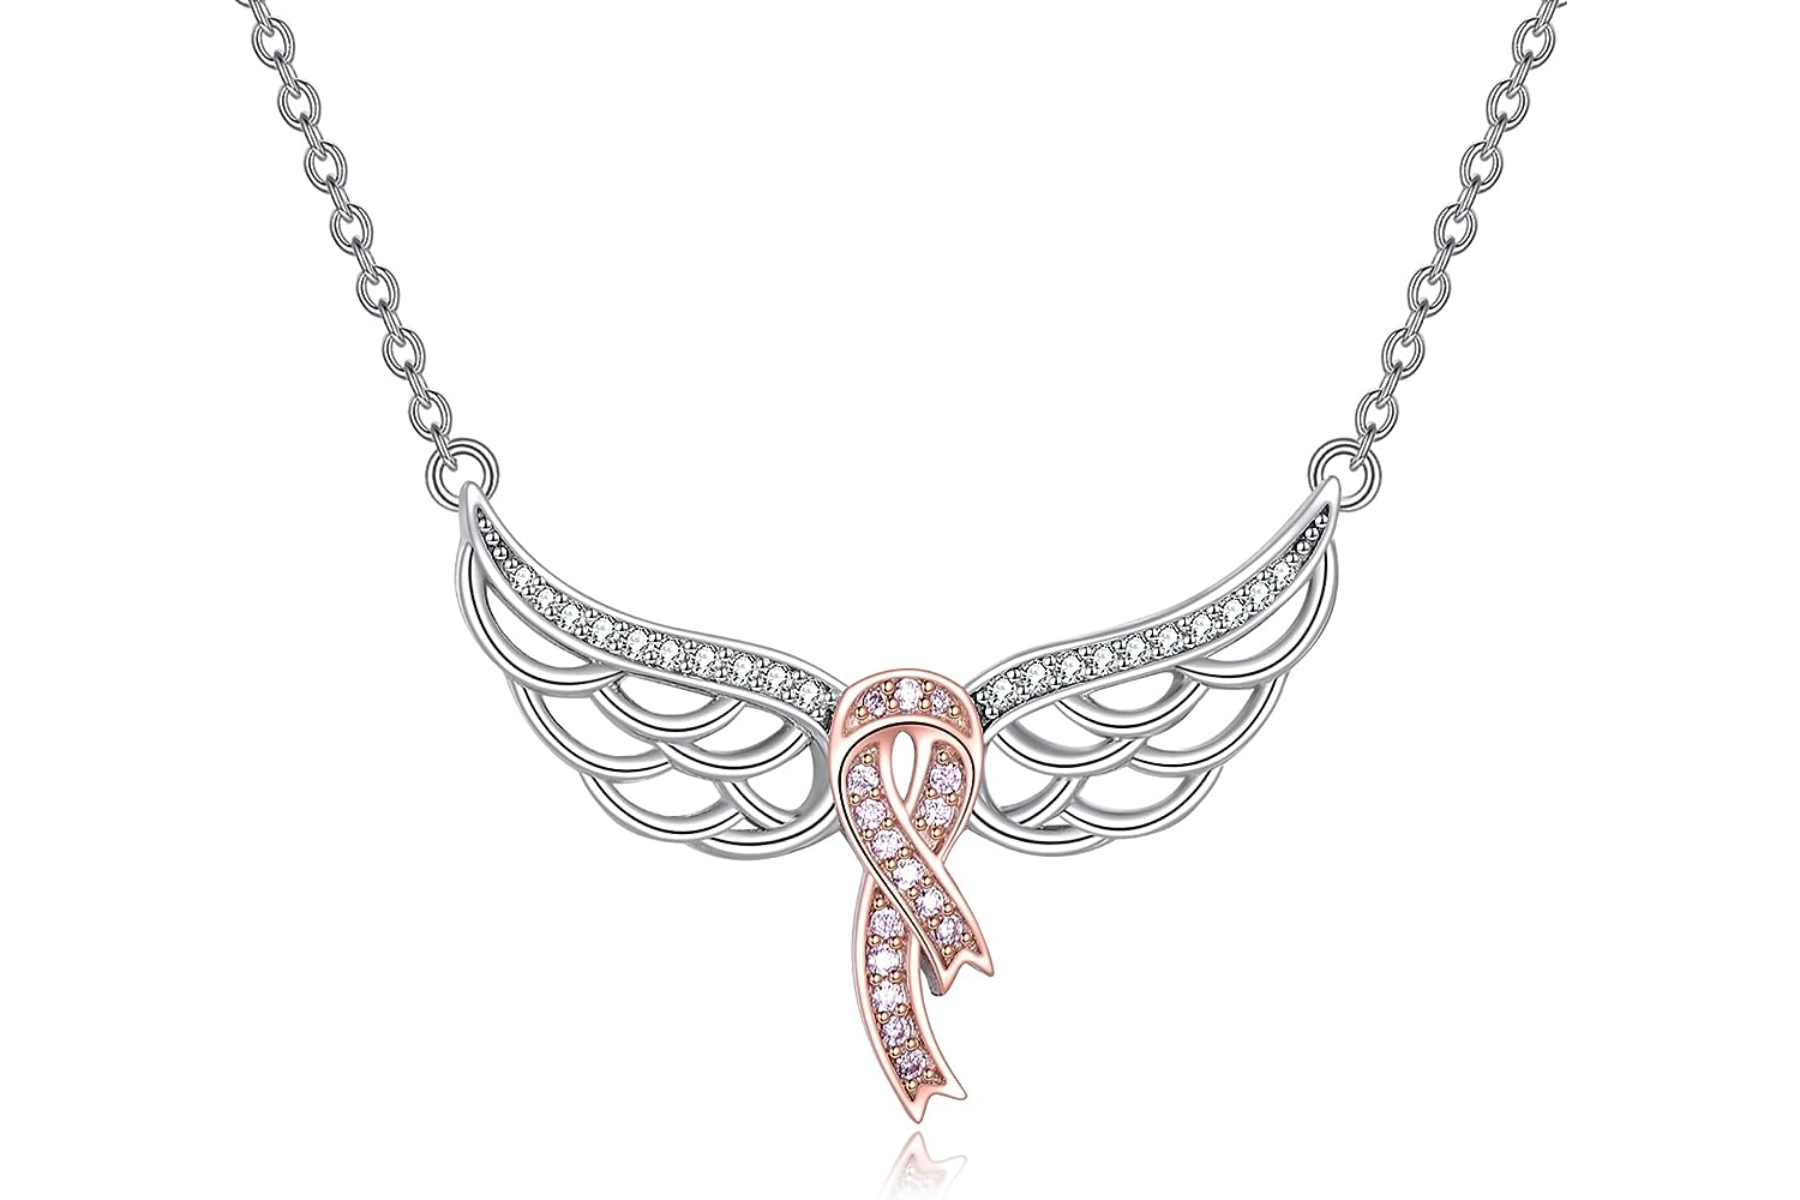 A necklace with wings and a ribbon in the center